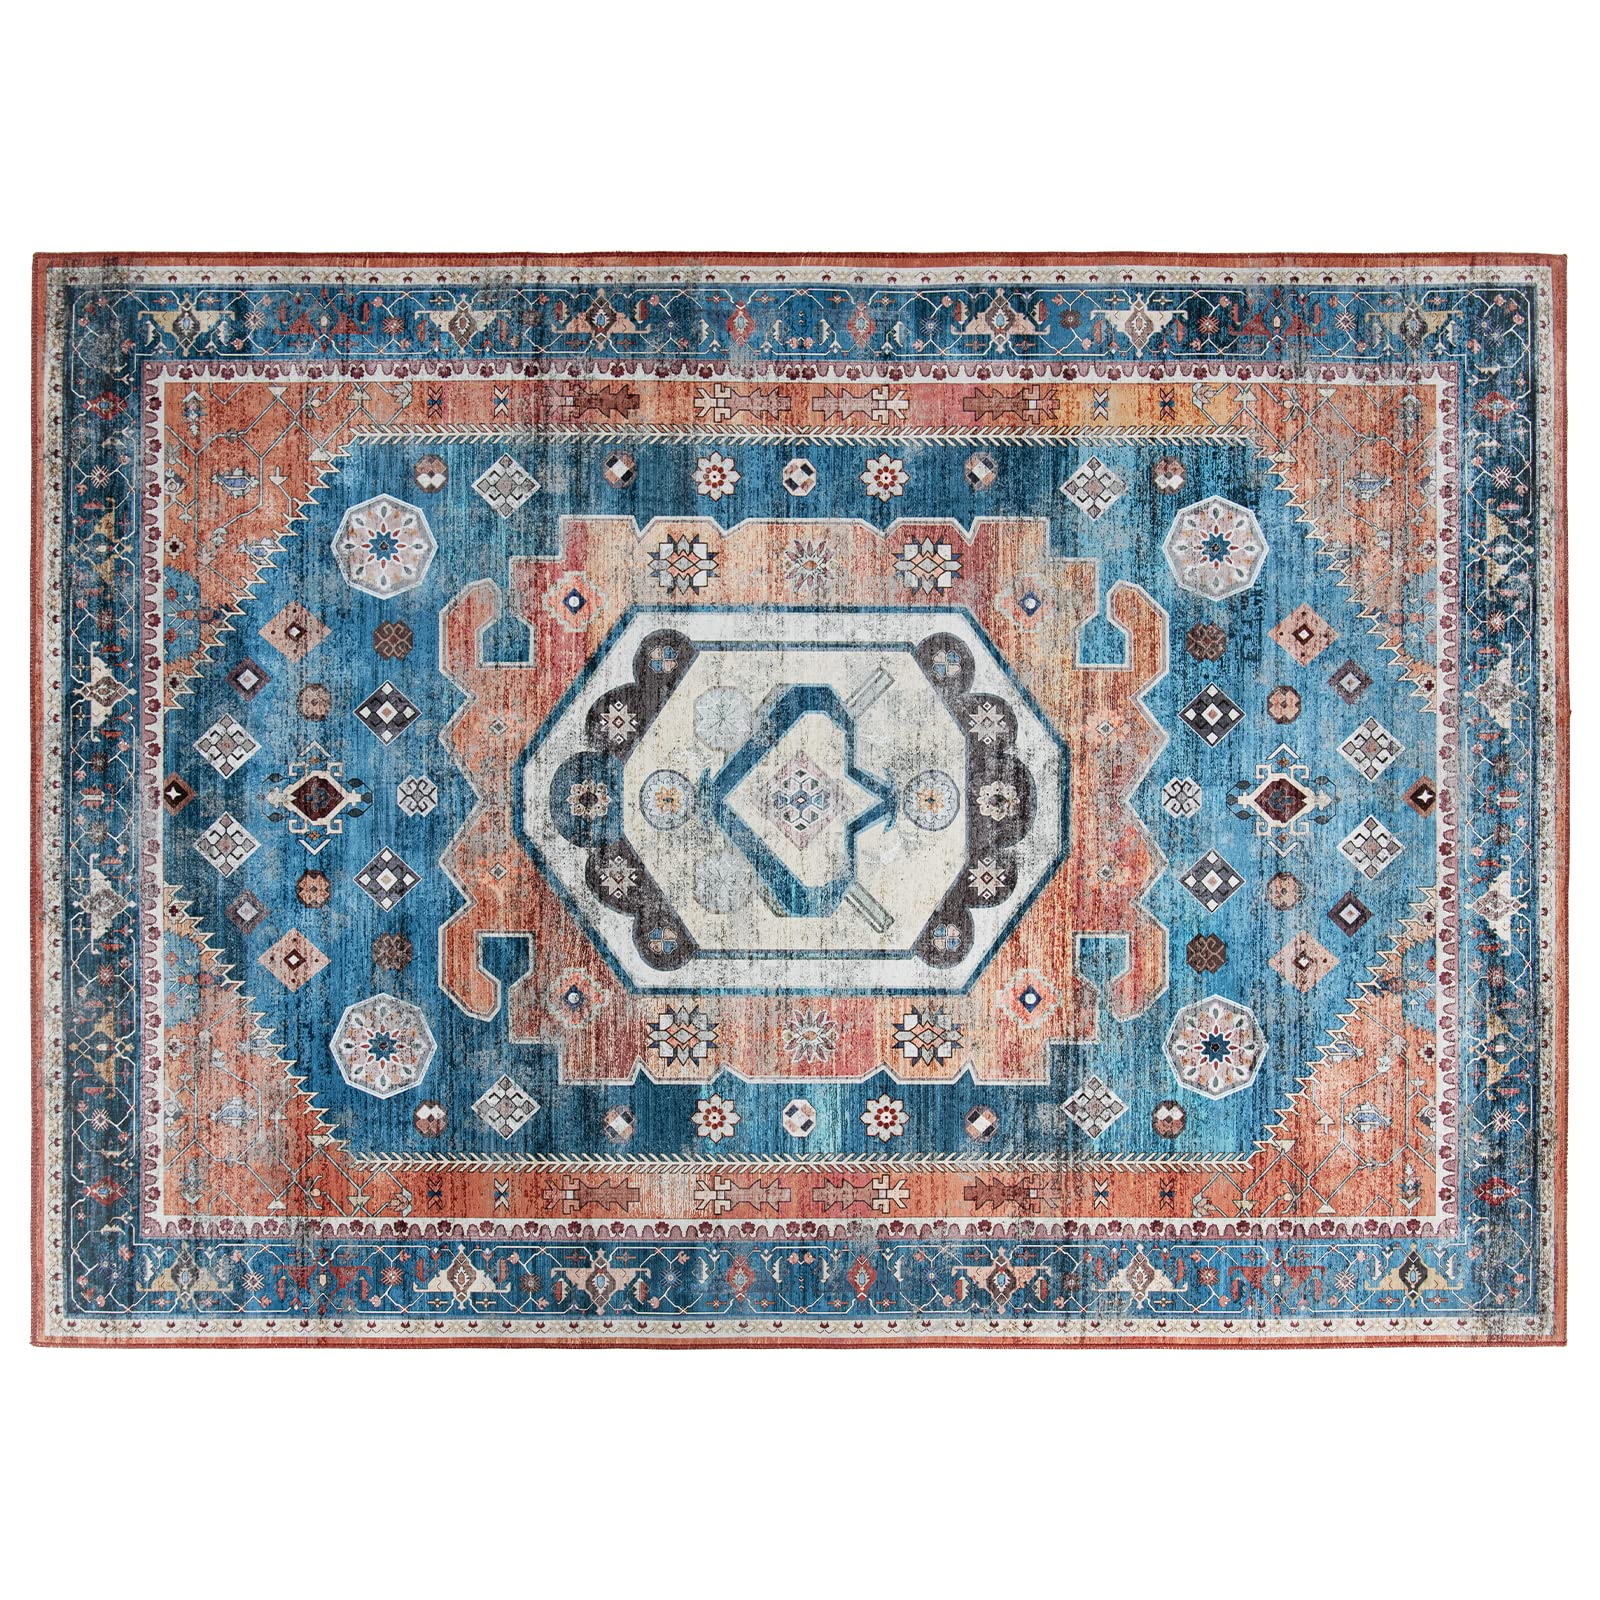 Giantex Area Rug, Easy to Clean Comfy Chic Vintage Floor Decoration Large Boho Area Carpet Rugs